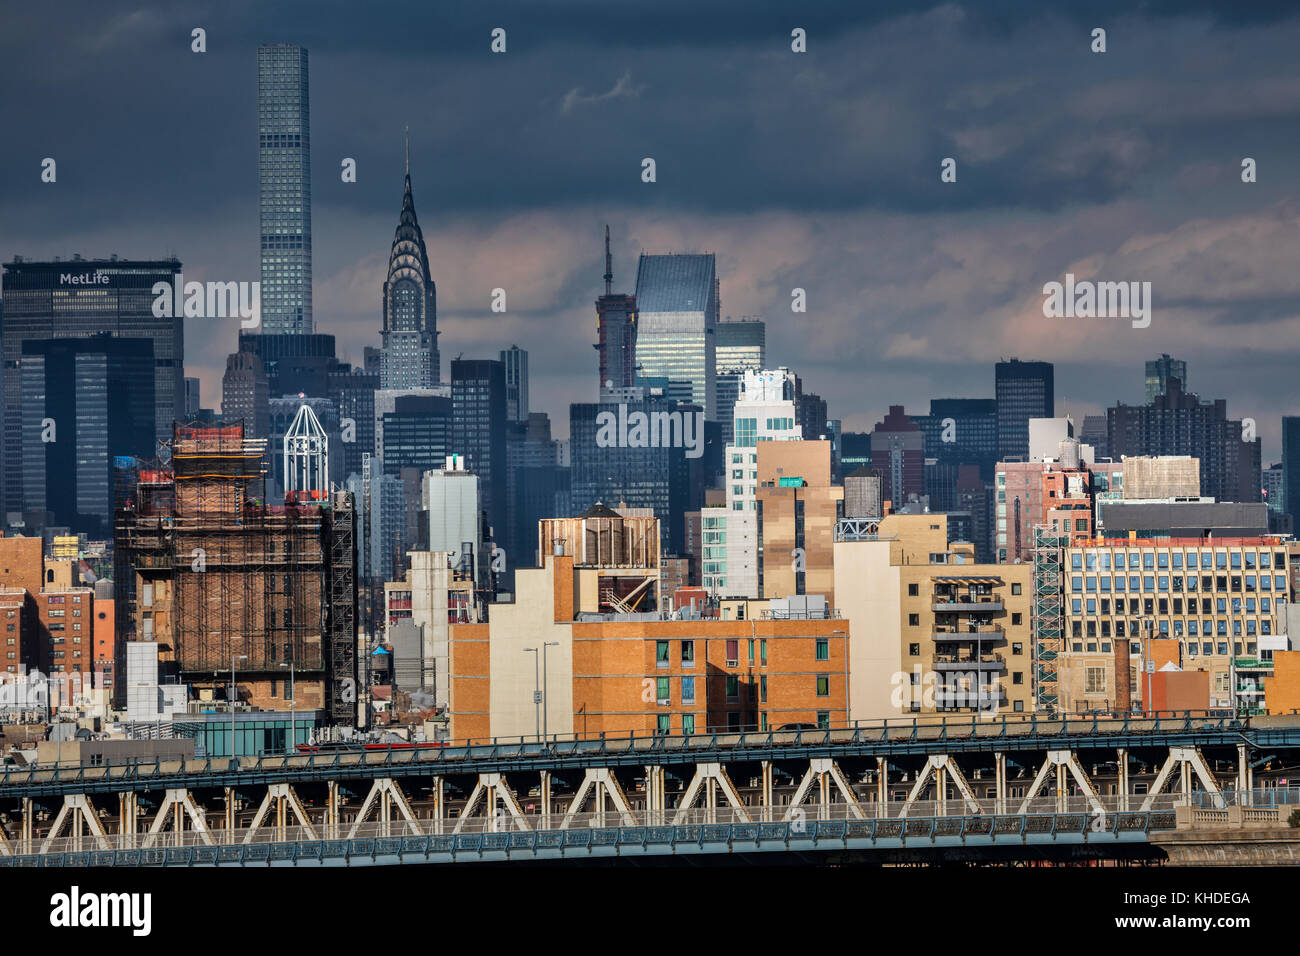 New York City at cloudy day Stock Photo